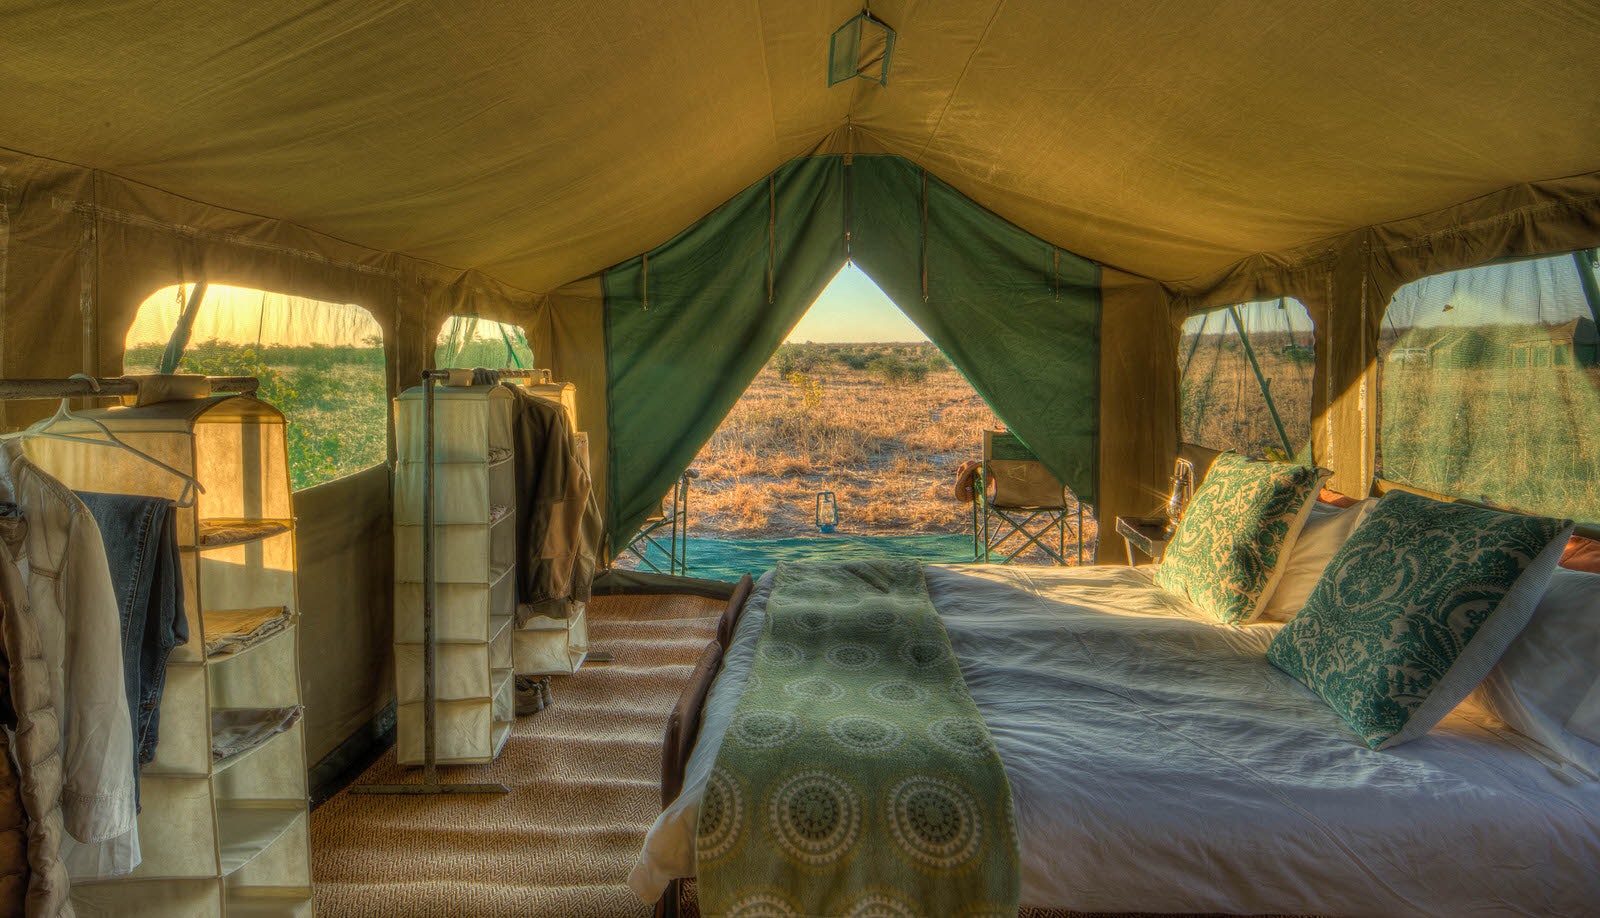 A large canvas tent in a mobile safari camp, with its zipper door and vented mesh windows draped open to let the early light in - outside is open grasslands. The tent holds a double bed and portable wardrobes © James Gifford / Lonely Planet